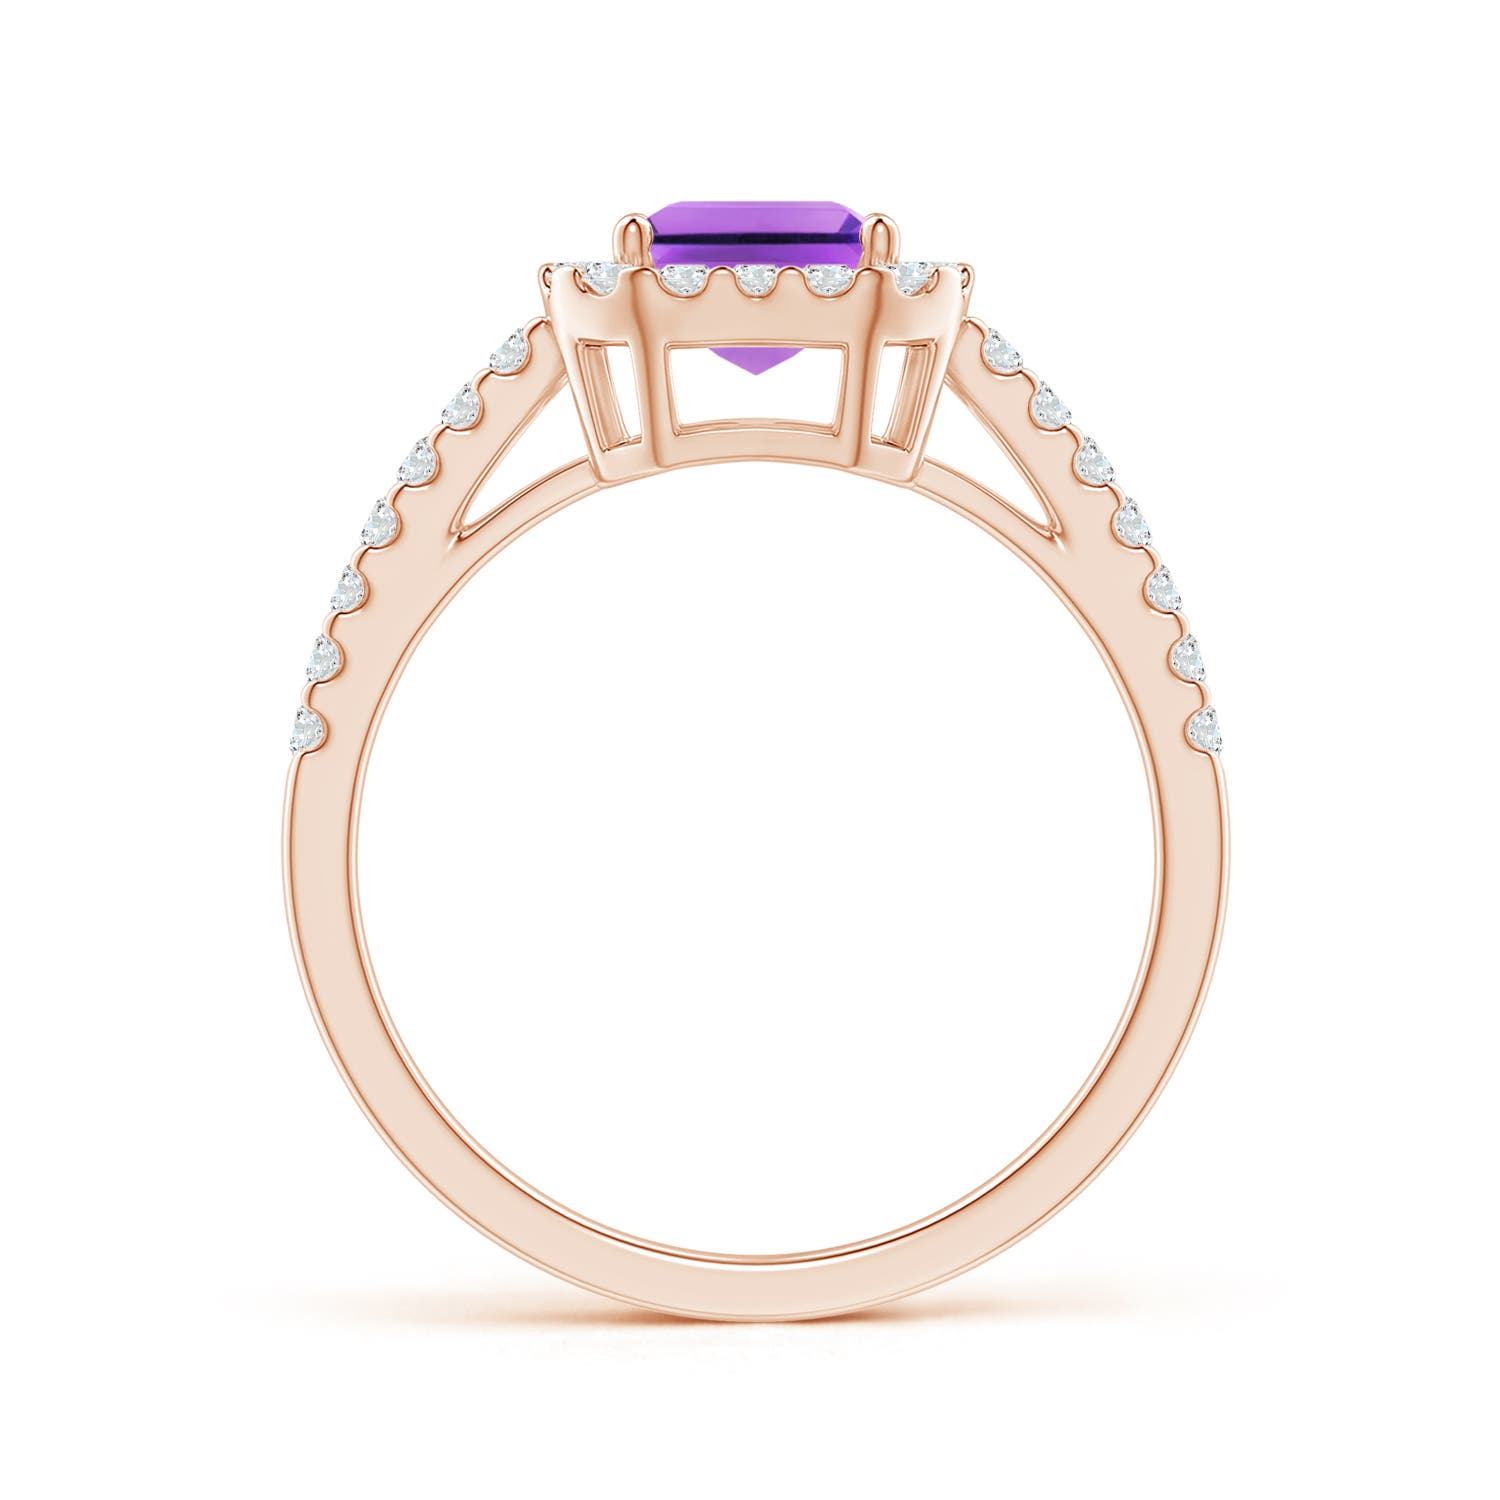 AA - Amethyst / 1.91 CT / 14 KT Rose Gold